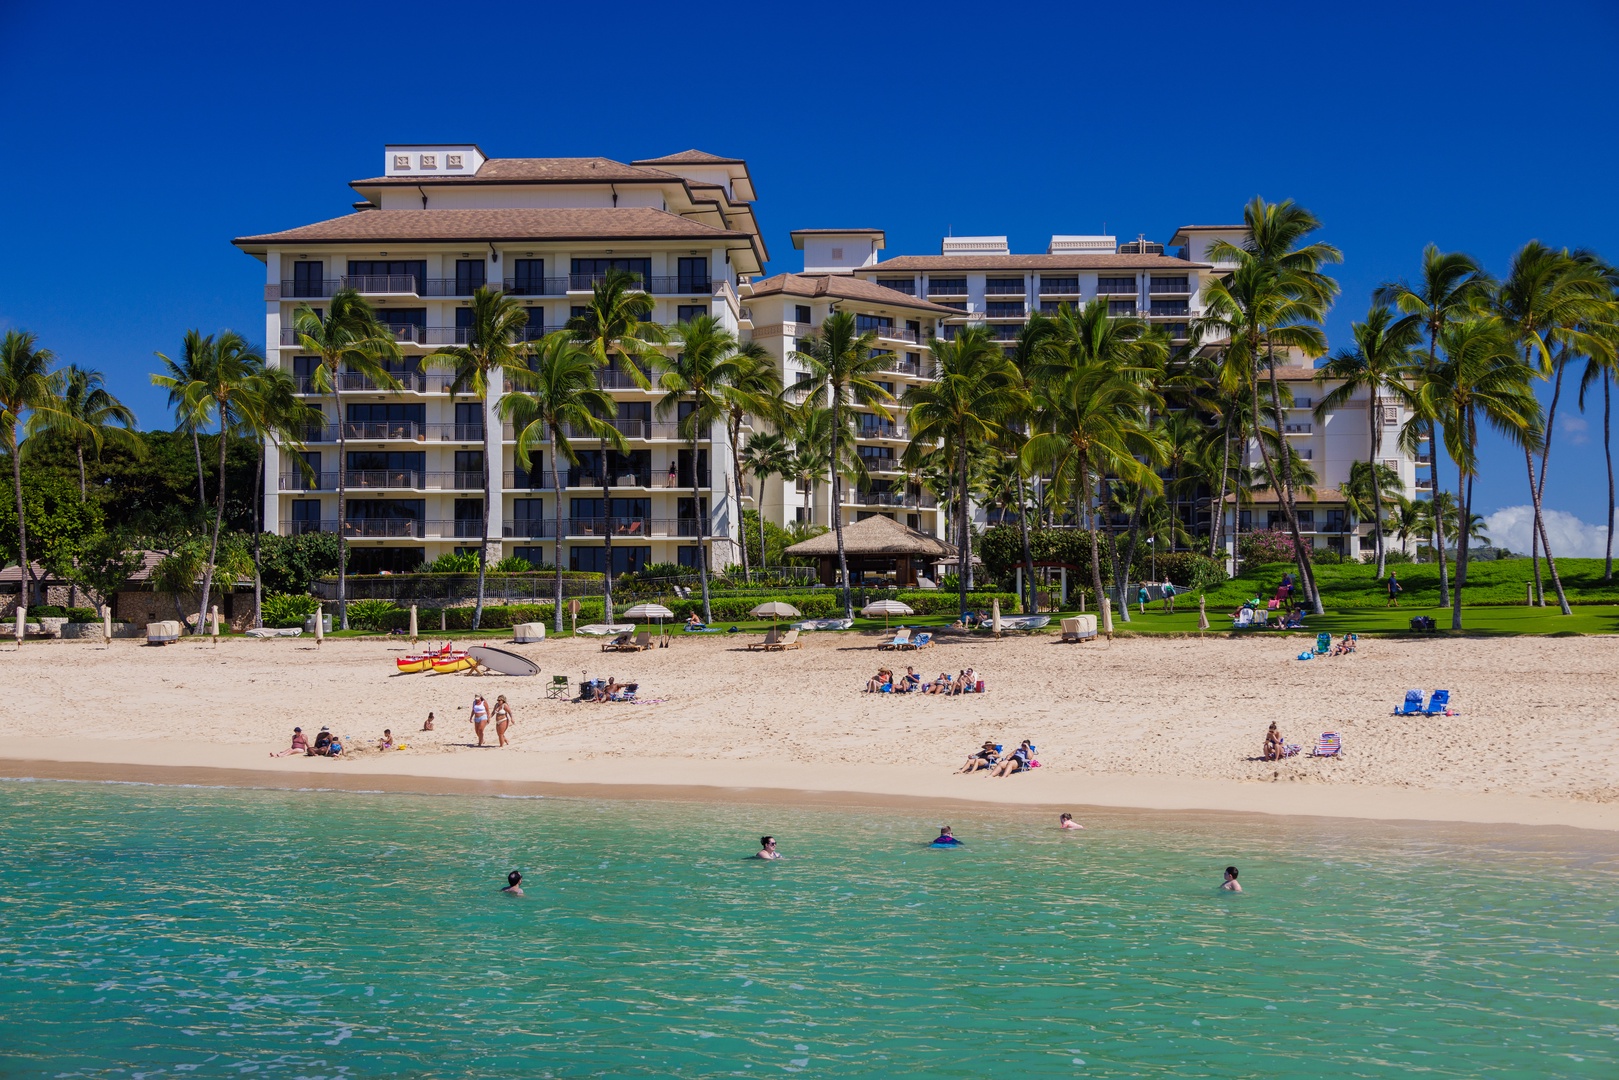 Kapolei Vacation Rentals, Ko Olina Kai 1105E - Ko Olina's private lagoons with soft sands and crystal blue water, perfect for afternoon swim or spectacular views.